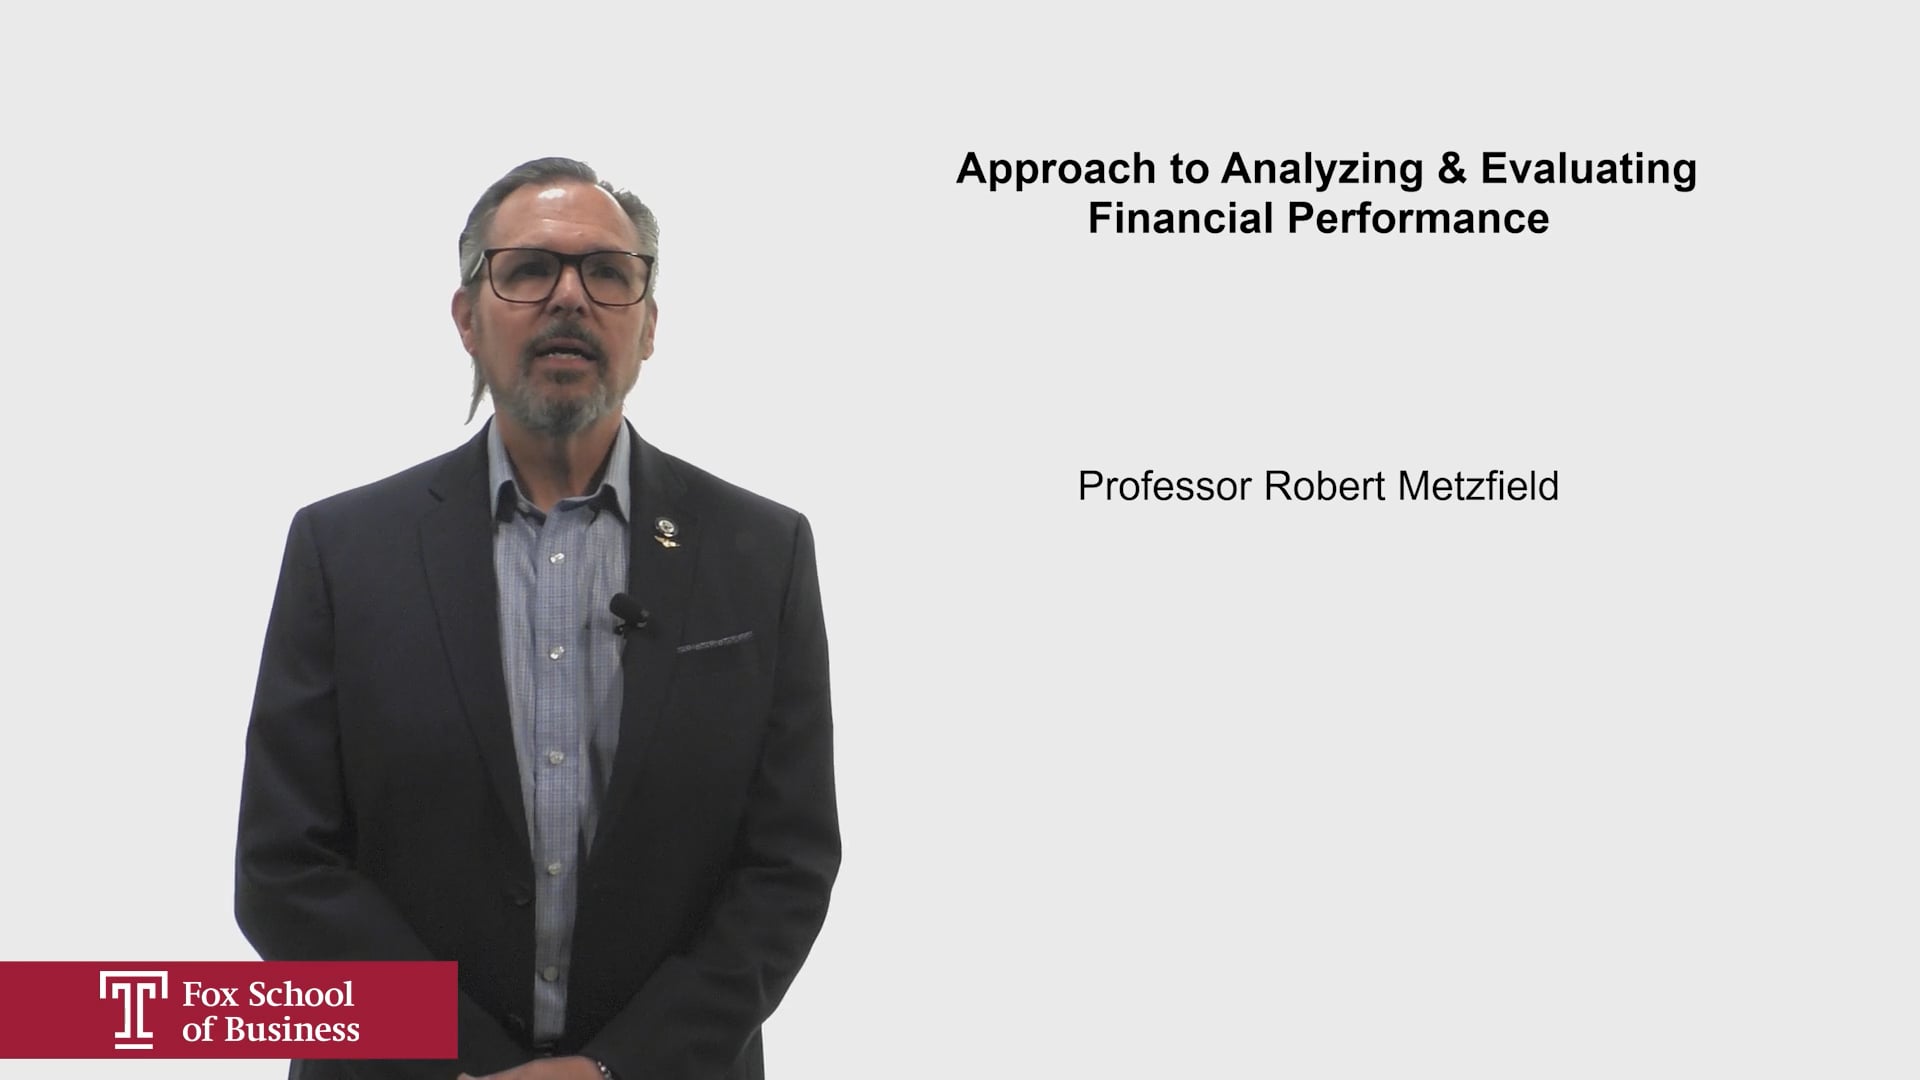 Approach to Analyzing & Evaluating Financial Performance